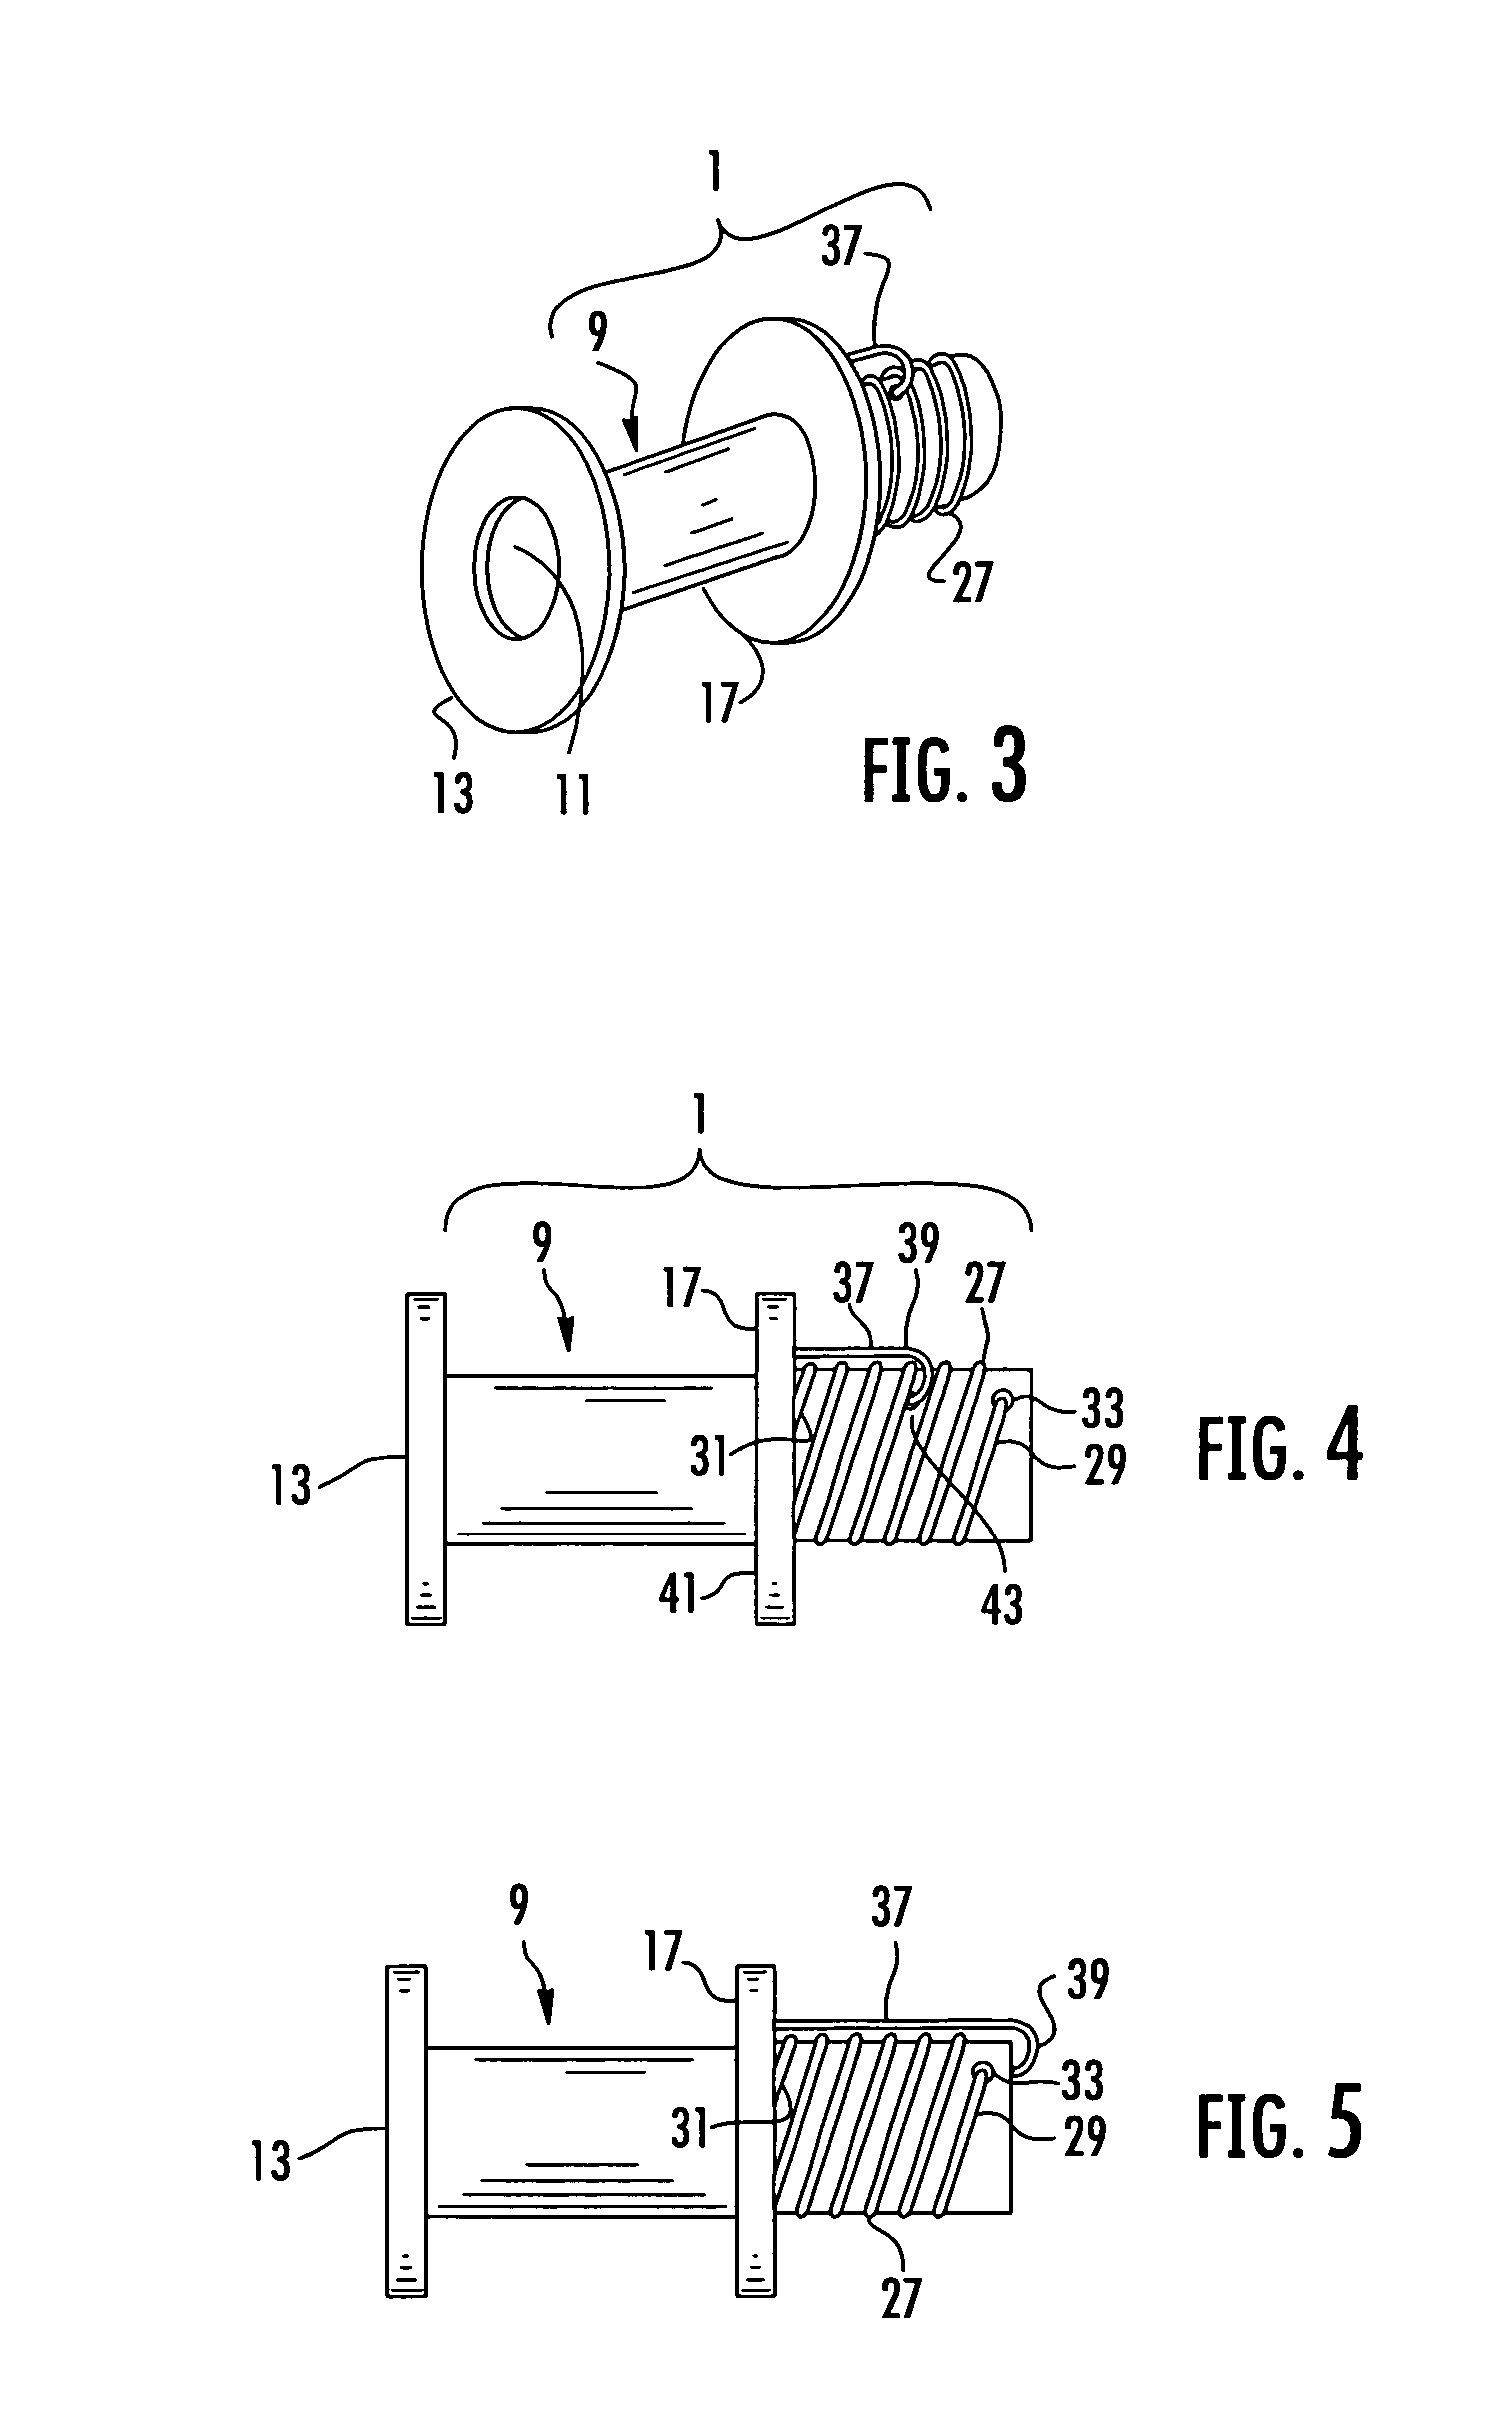 Vascular conduit device and system for implanting